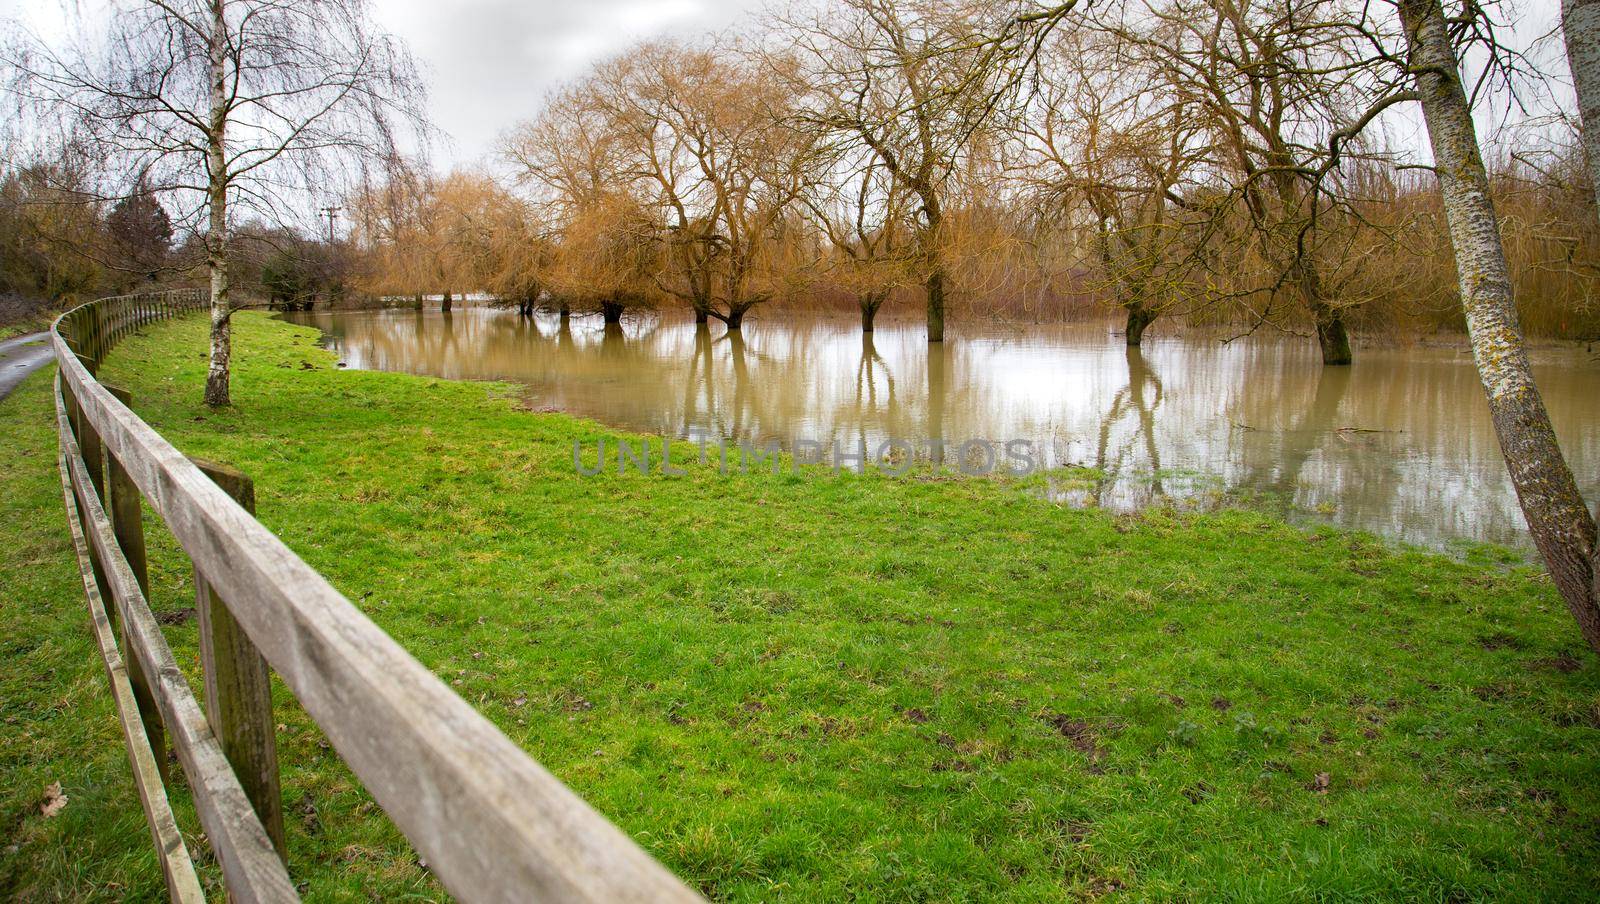 Flooded filed, high water, Farm fence, green grass, flooded filed with trees and water reflection. Global warming disaster. UK, England, Suffolk 2021